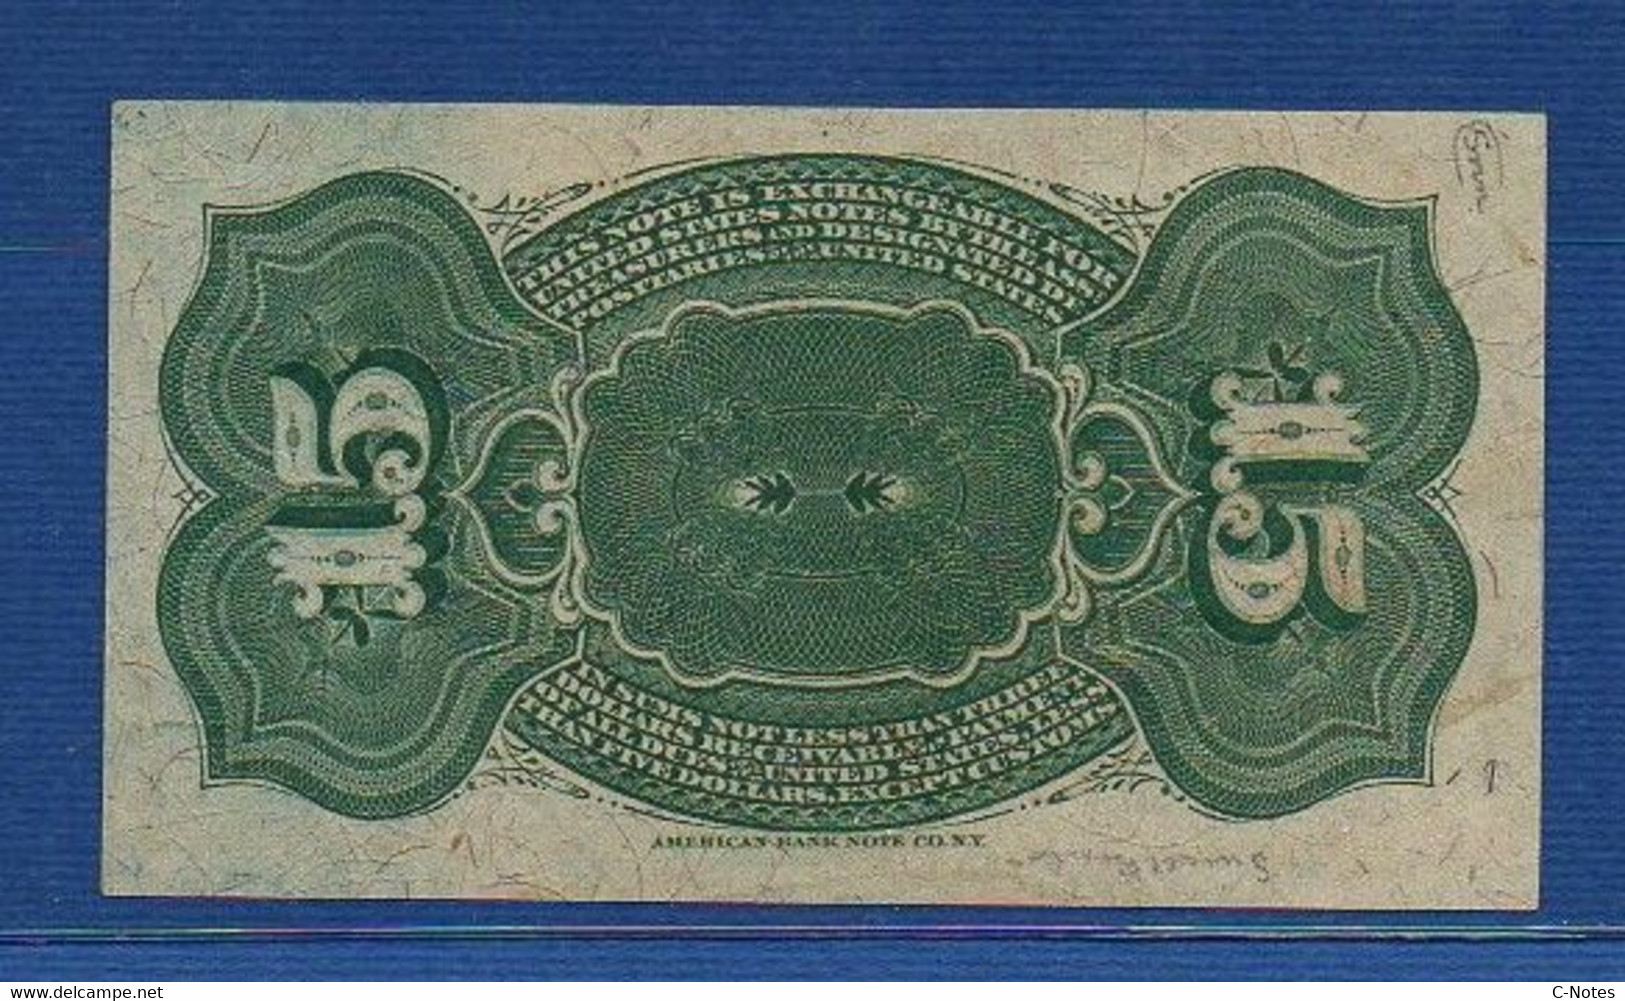 UNITED STATES OF AMERICA - P.116 – 15 Cents 1863 AUNC, No Serial Number - 1863 : 4 Uitgave